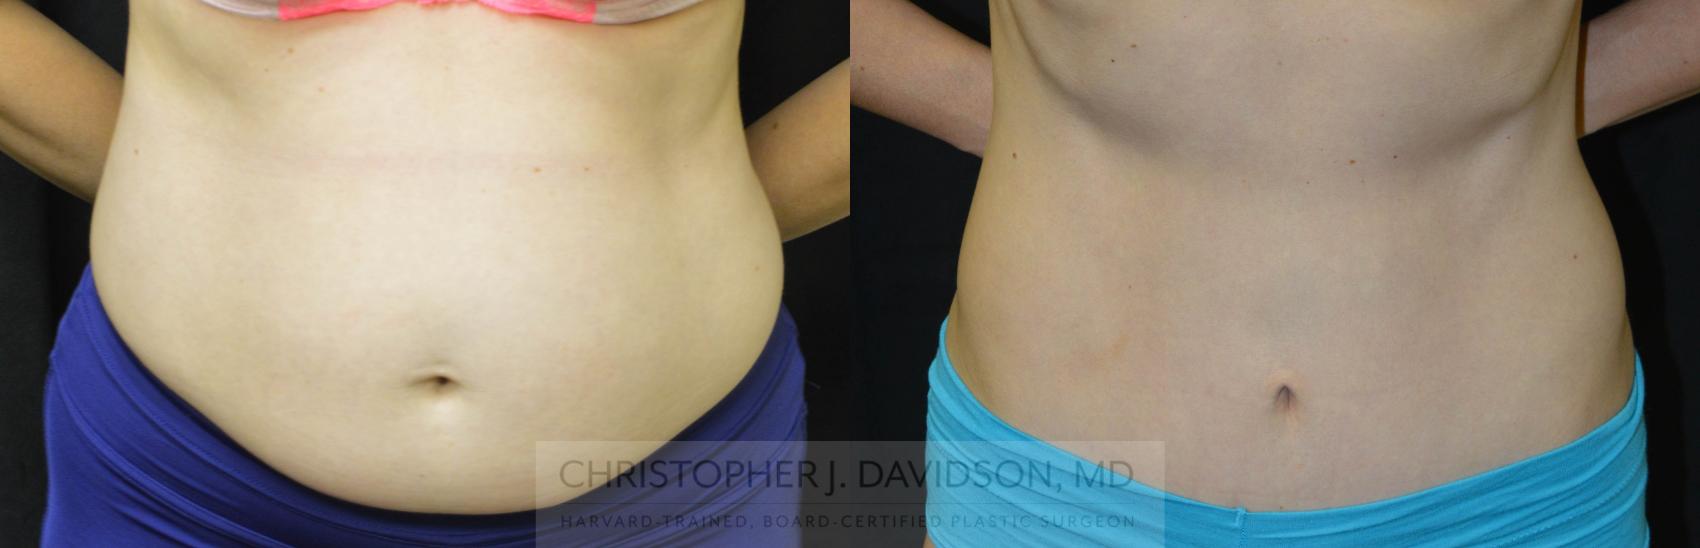 Tummy Tuck (Abdominoplasty) Case 40 Before & After View #1 | Boston, MA | Christopher J. Davidson, MD